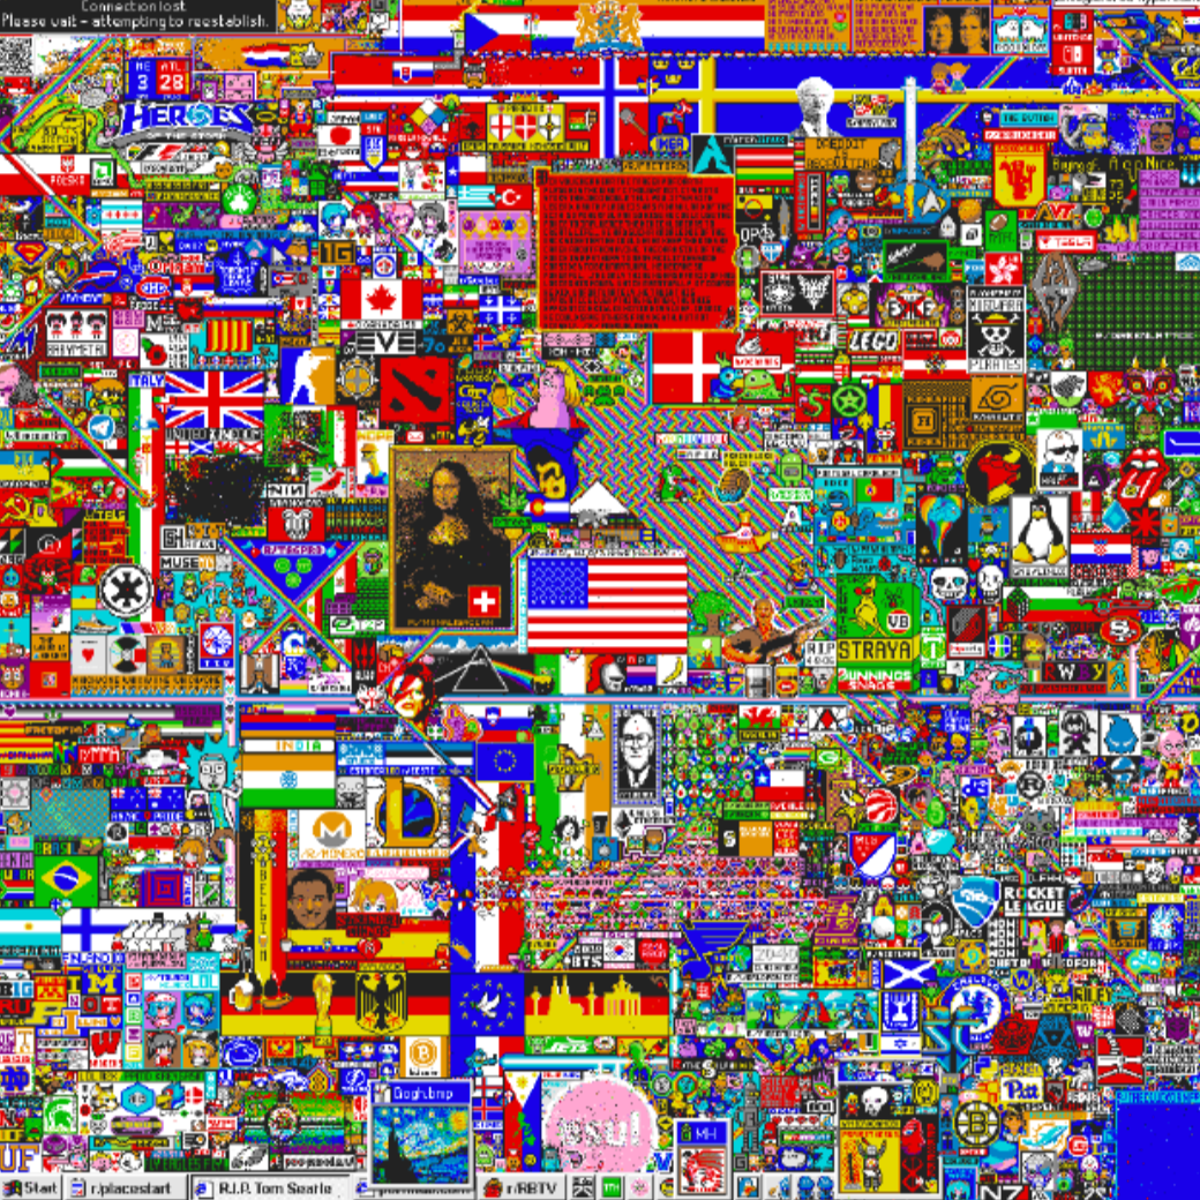 Reddit Place was first launched as a collaborative art installation in April 2017  (Reddit)